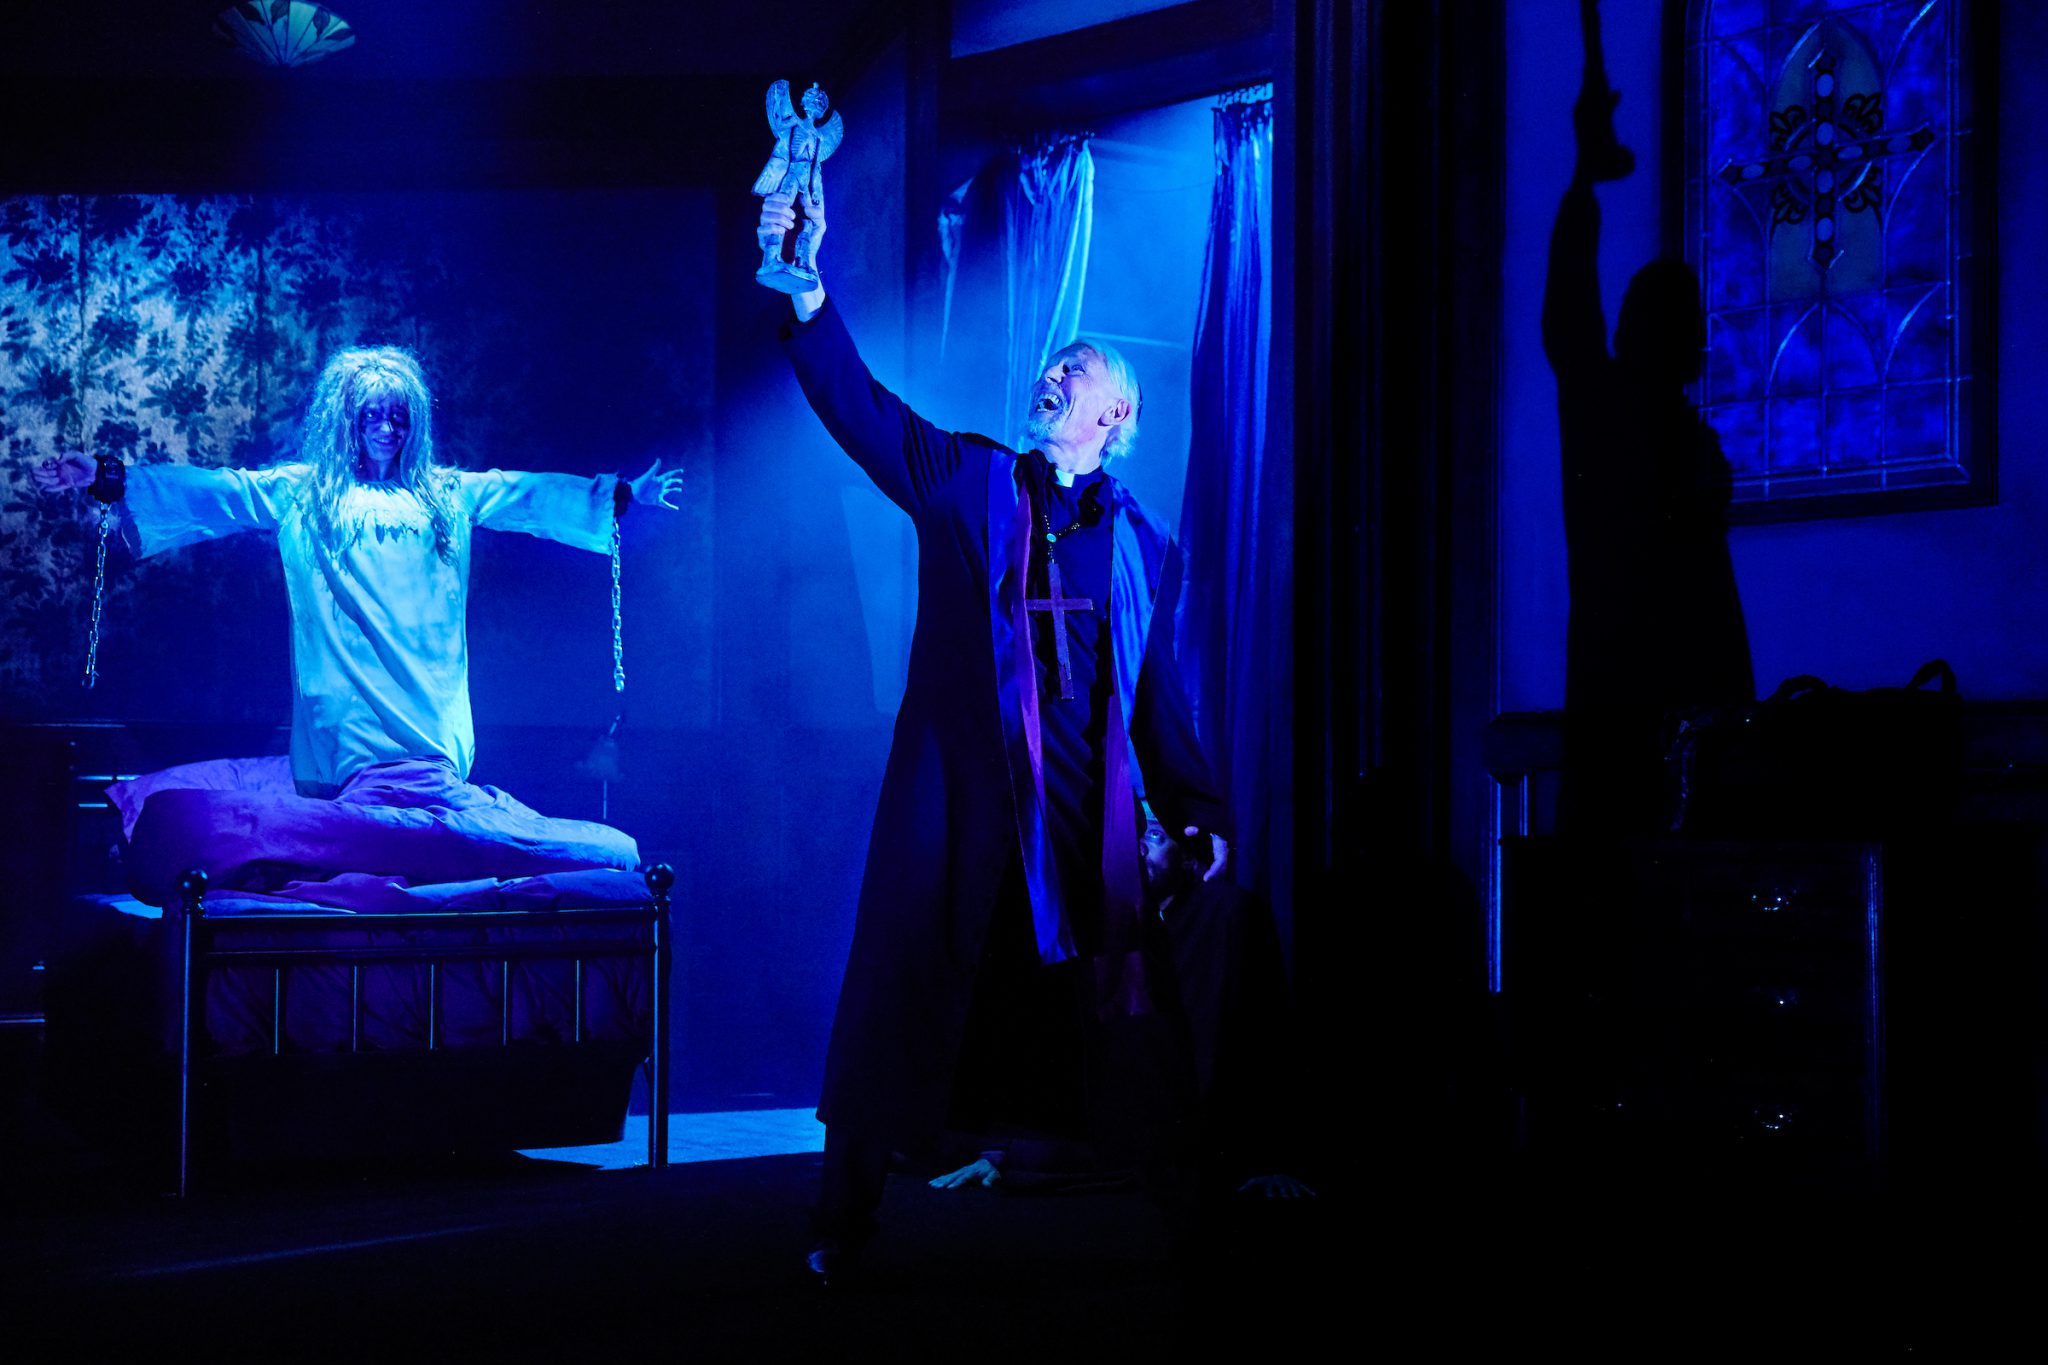 REVIEW The Exorcist Visual effects & the central role turn heads